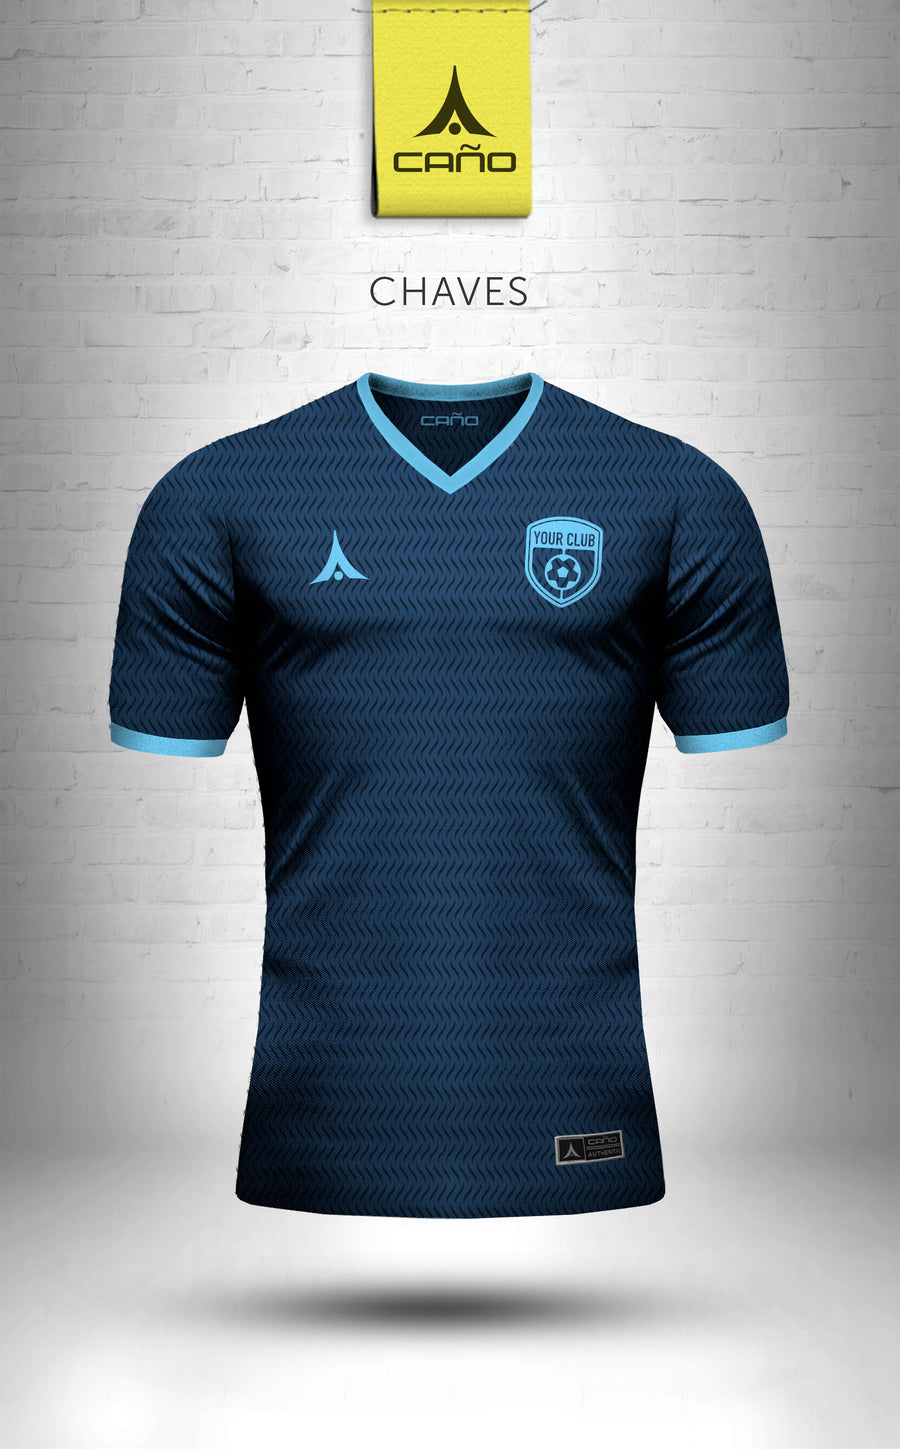 Chaves in navy/light blue